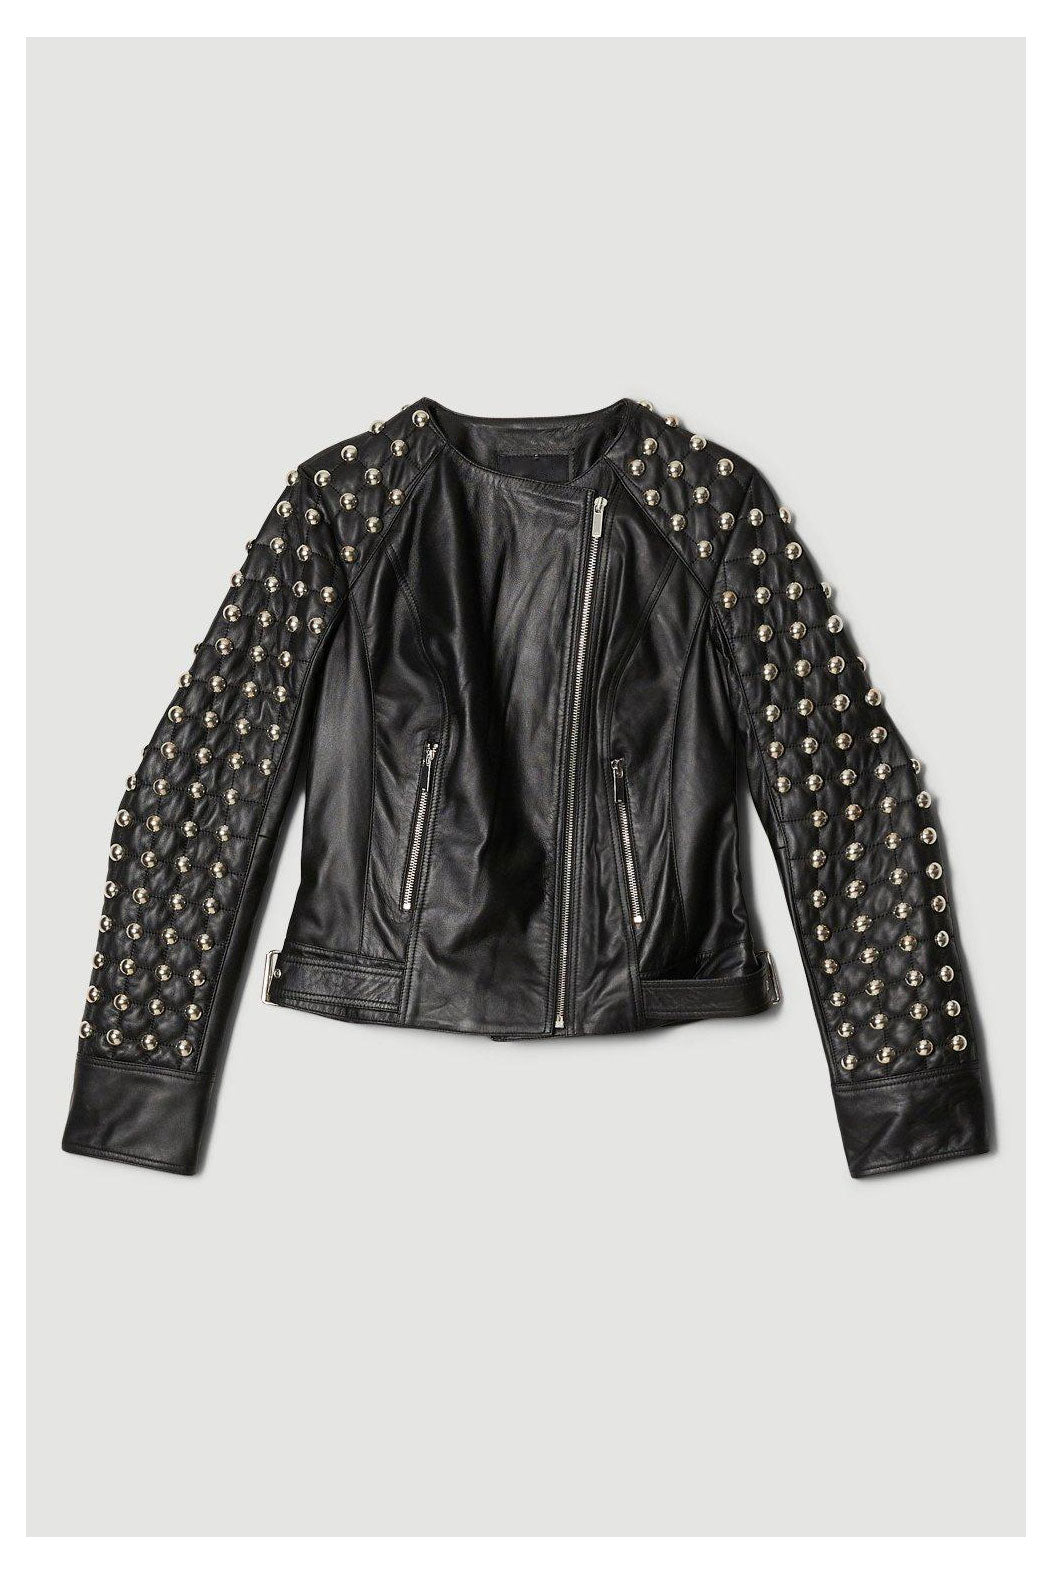 New Women Black Fashion Style Silver Spiked Studded Leather Jacket